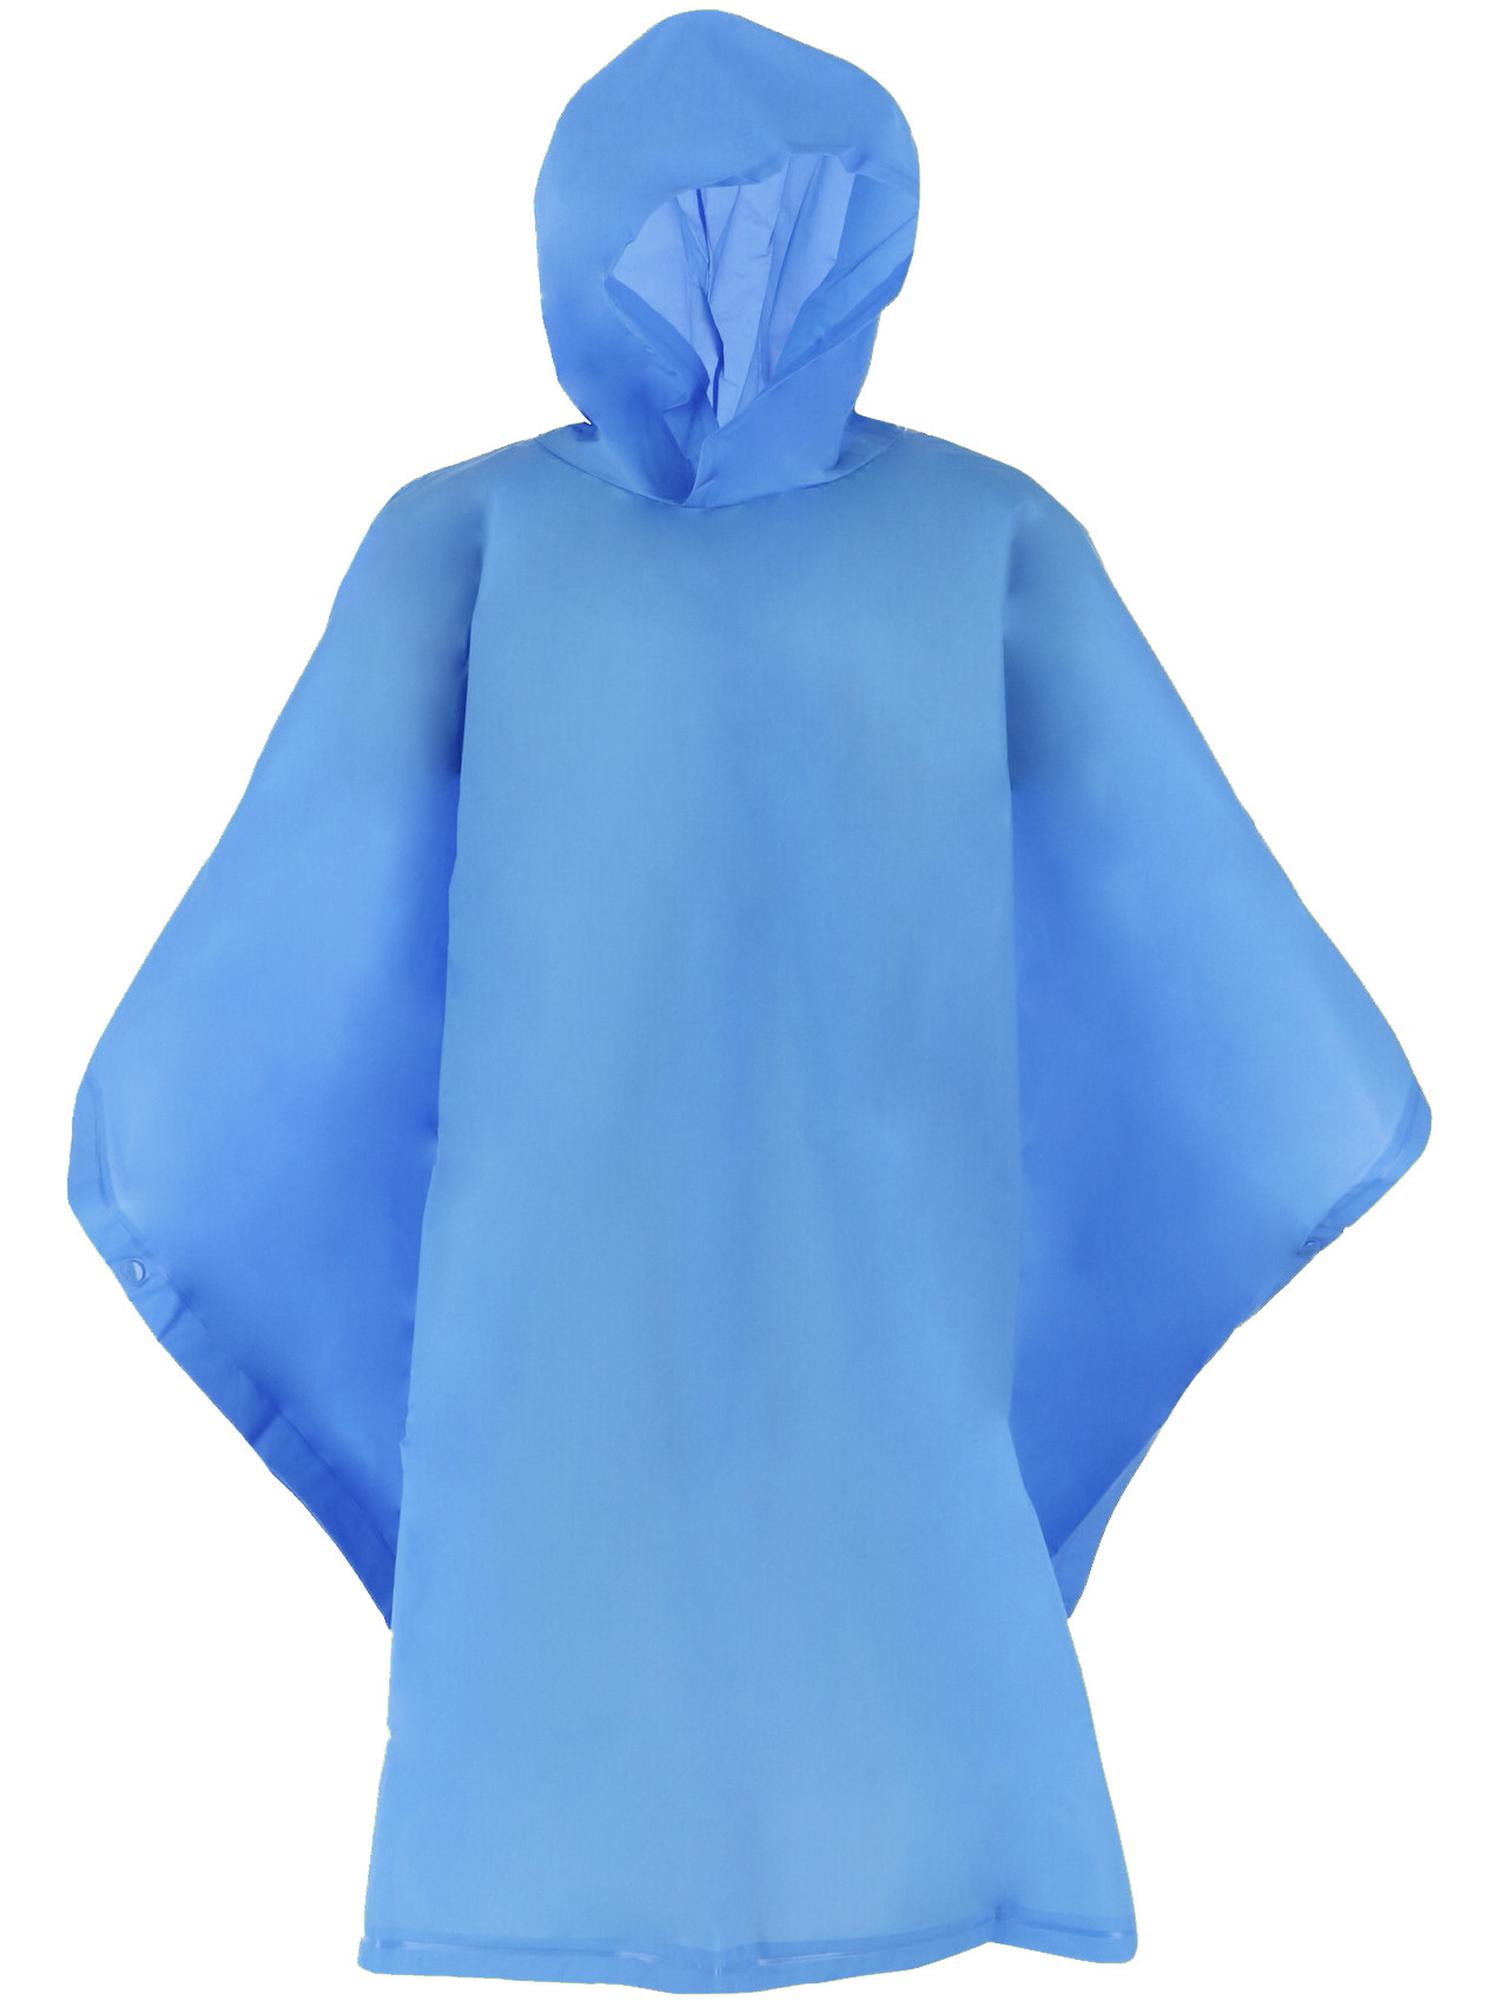 New Totes Kids' Hooded Pullover Rain Poncho with Snaps 